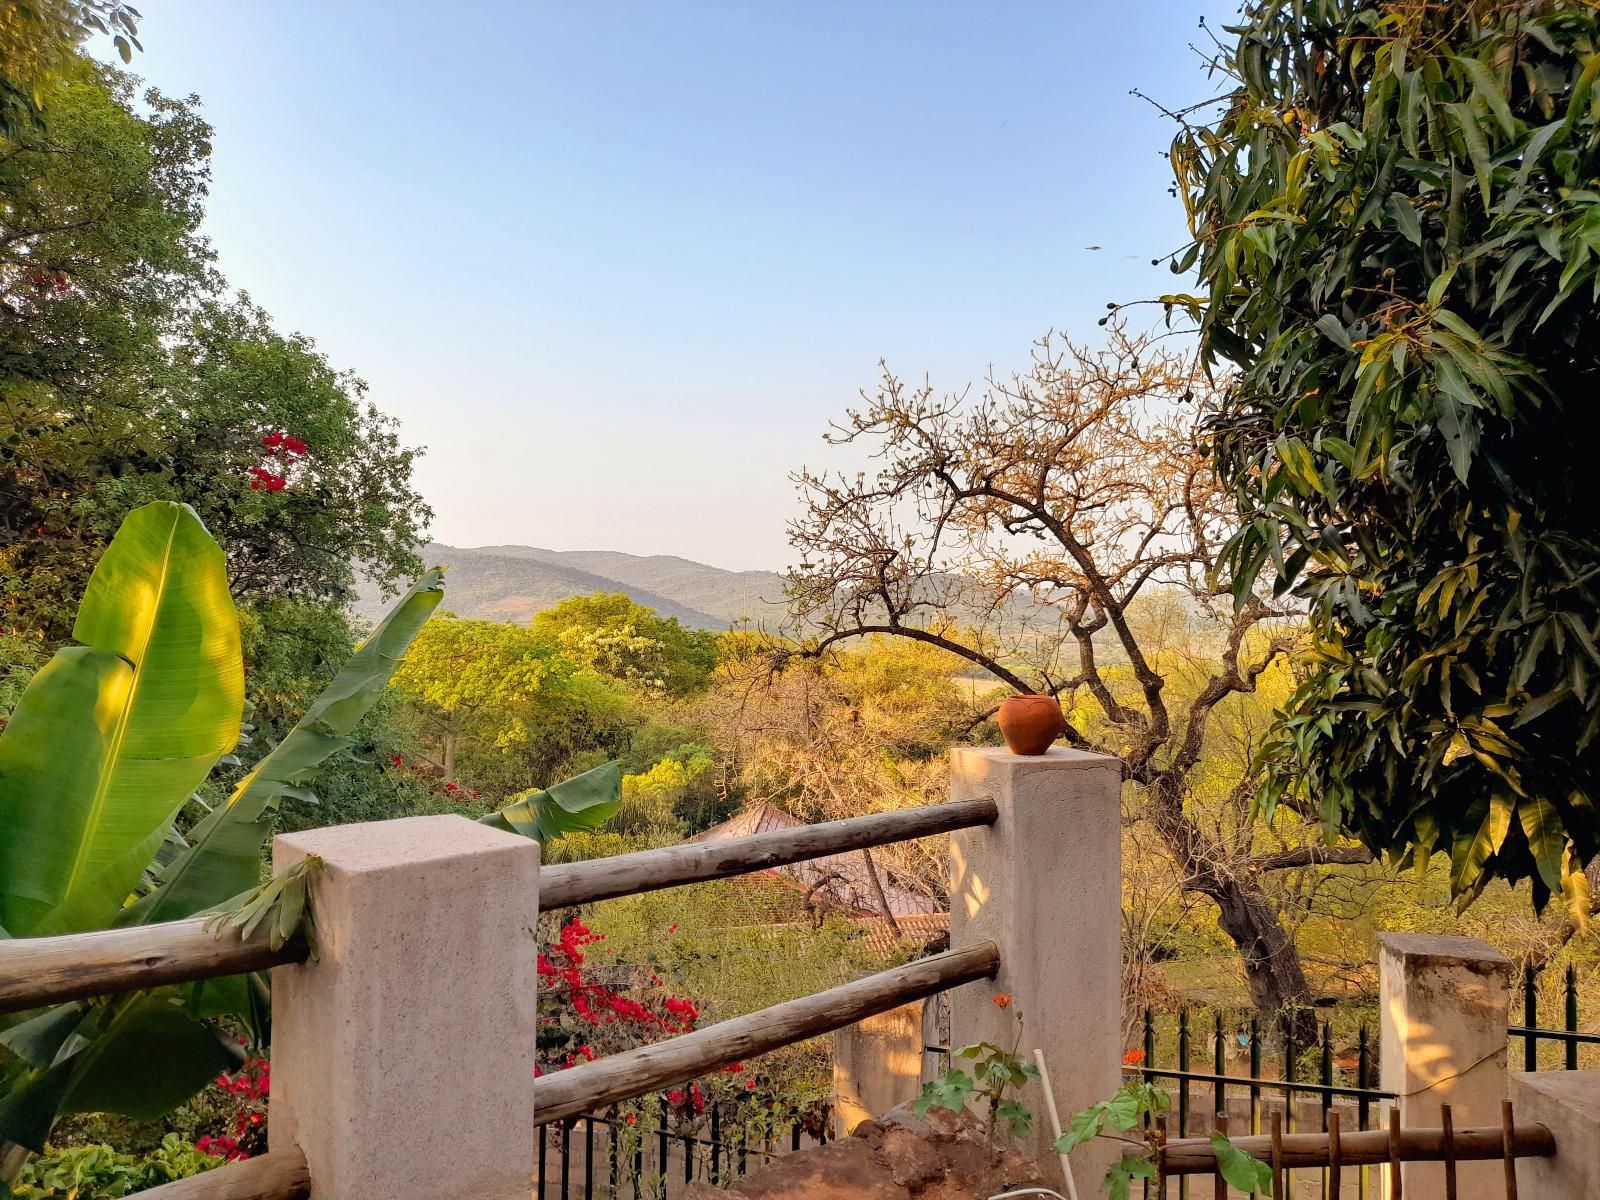 The Healing Hill Guesthouse Hazyview Mpumalanga South Africa Complementary Colors, Cactus, Plant, Nature, Garden